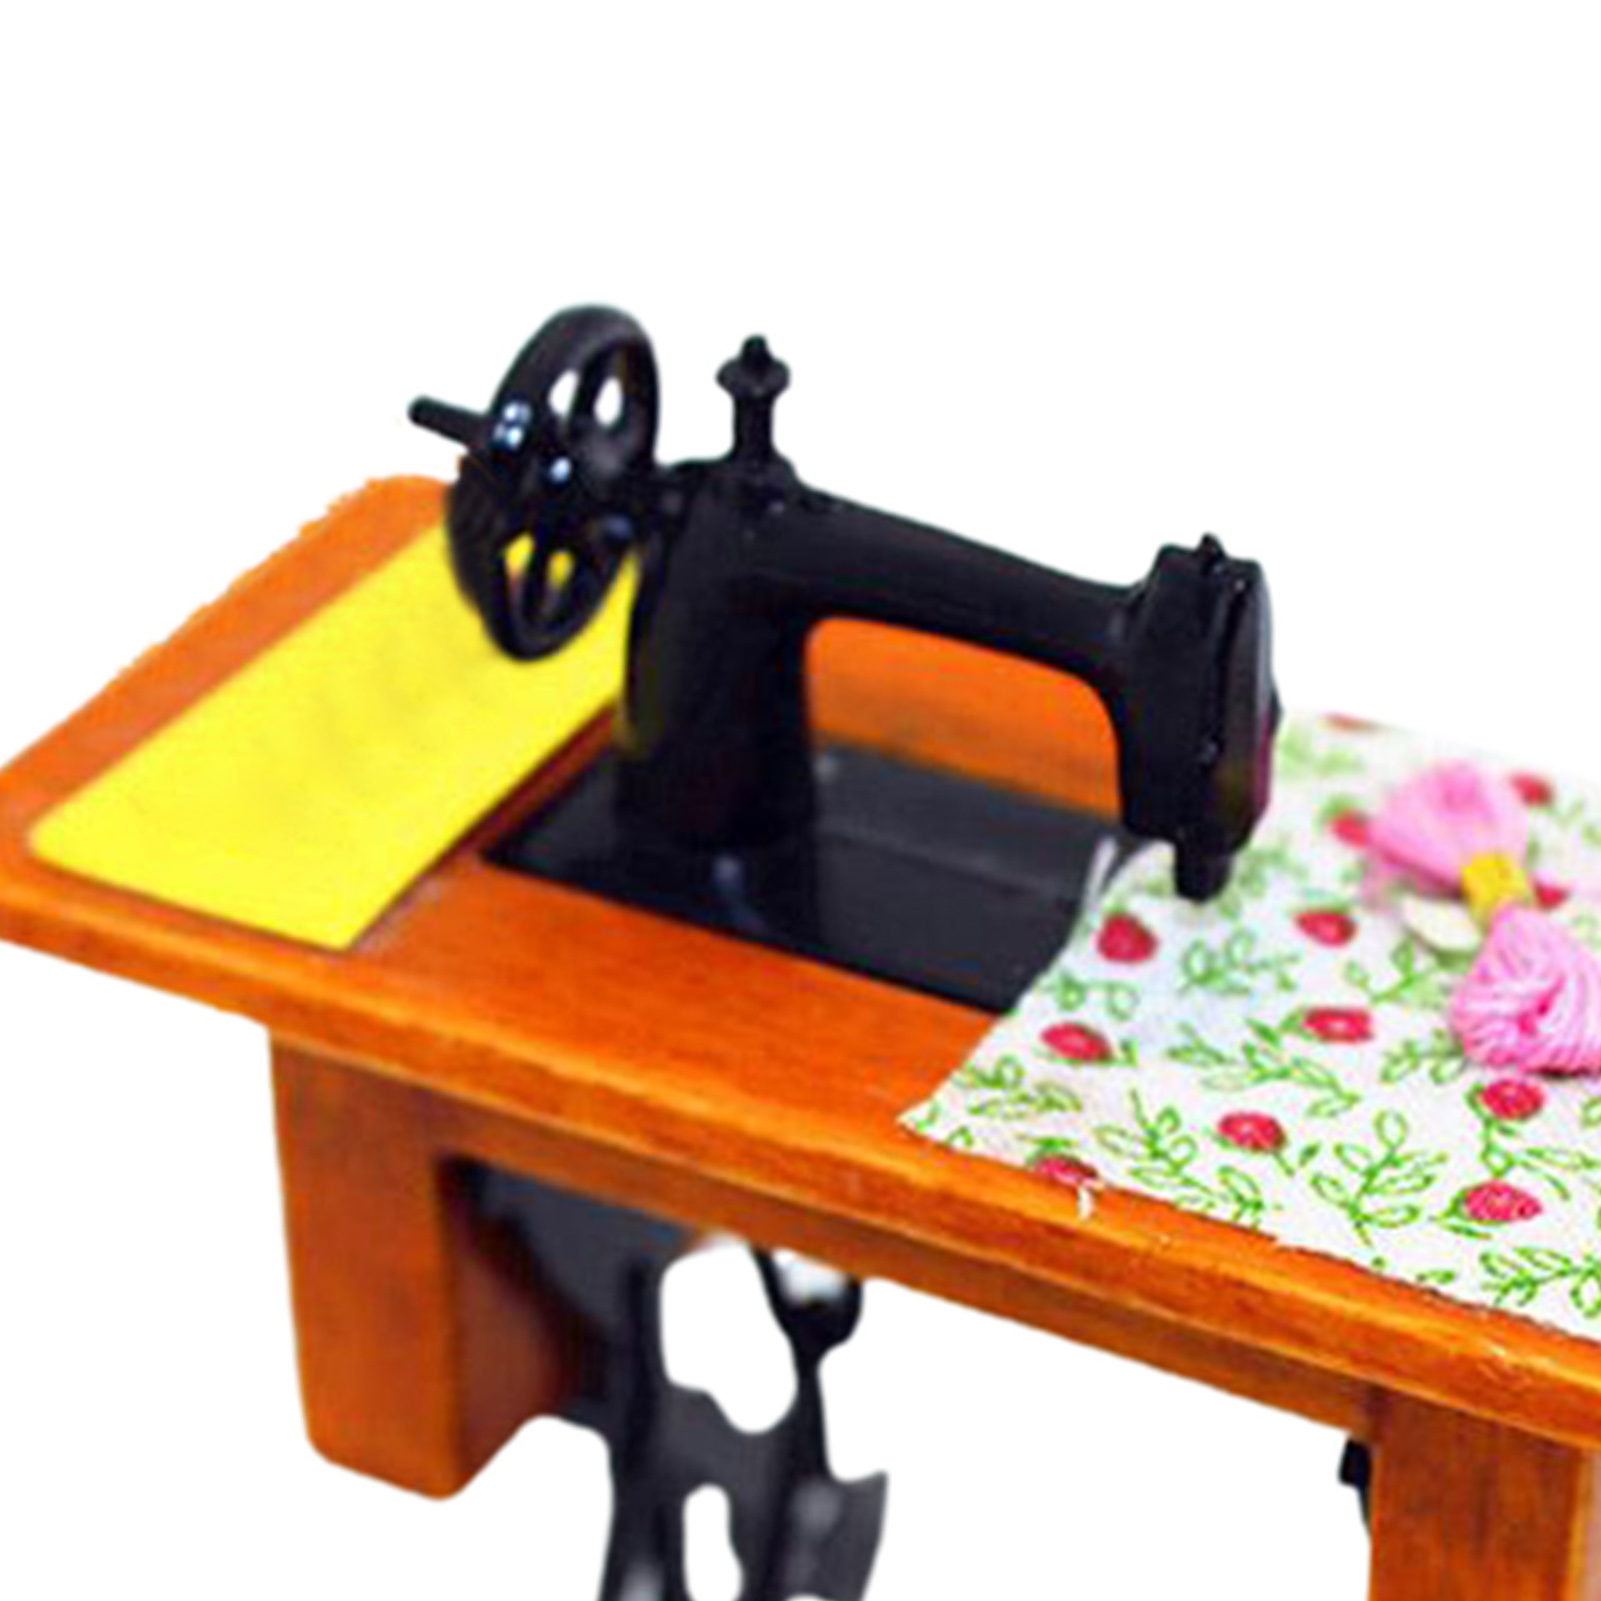 1/12 Dollhouse Mini Furniture Wooden Sewing Machine with Fabric